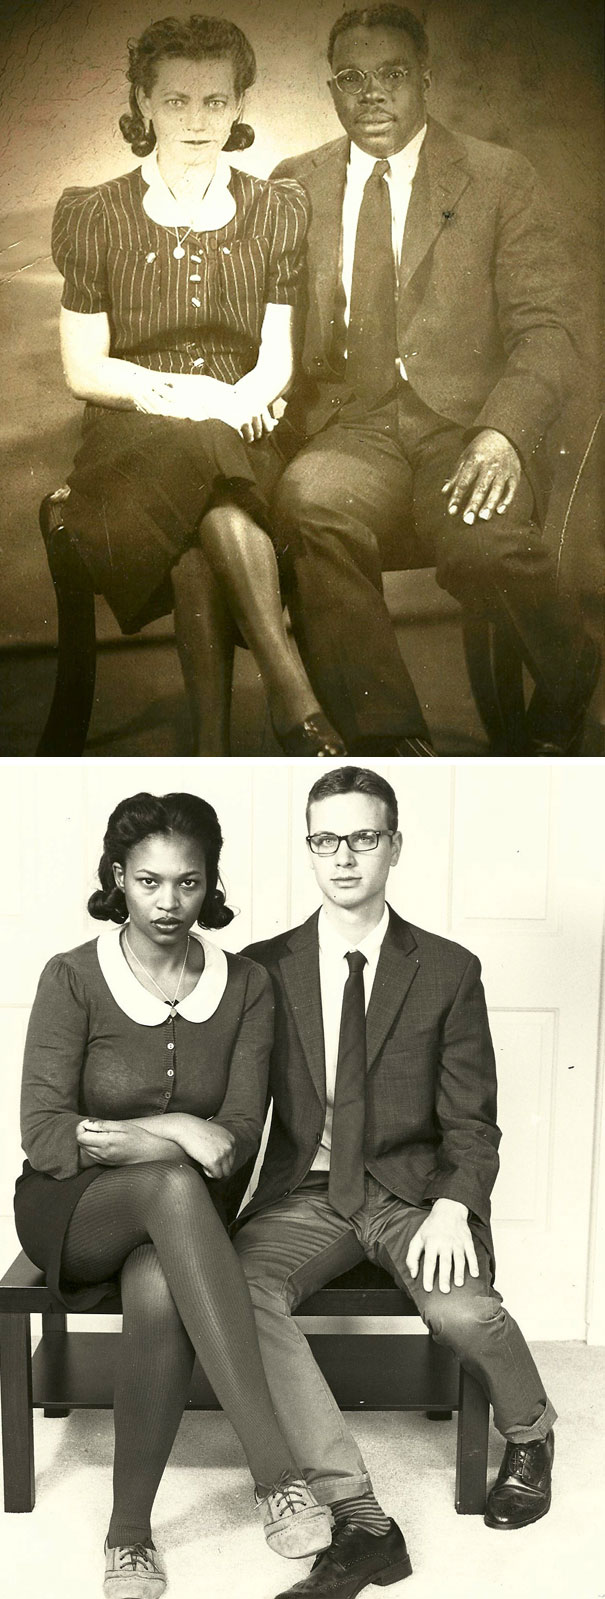 My Boyfriend And I Attempted To Recreate My Favorite Picture Of My Grandparents, This Was The Result.